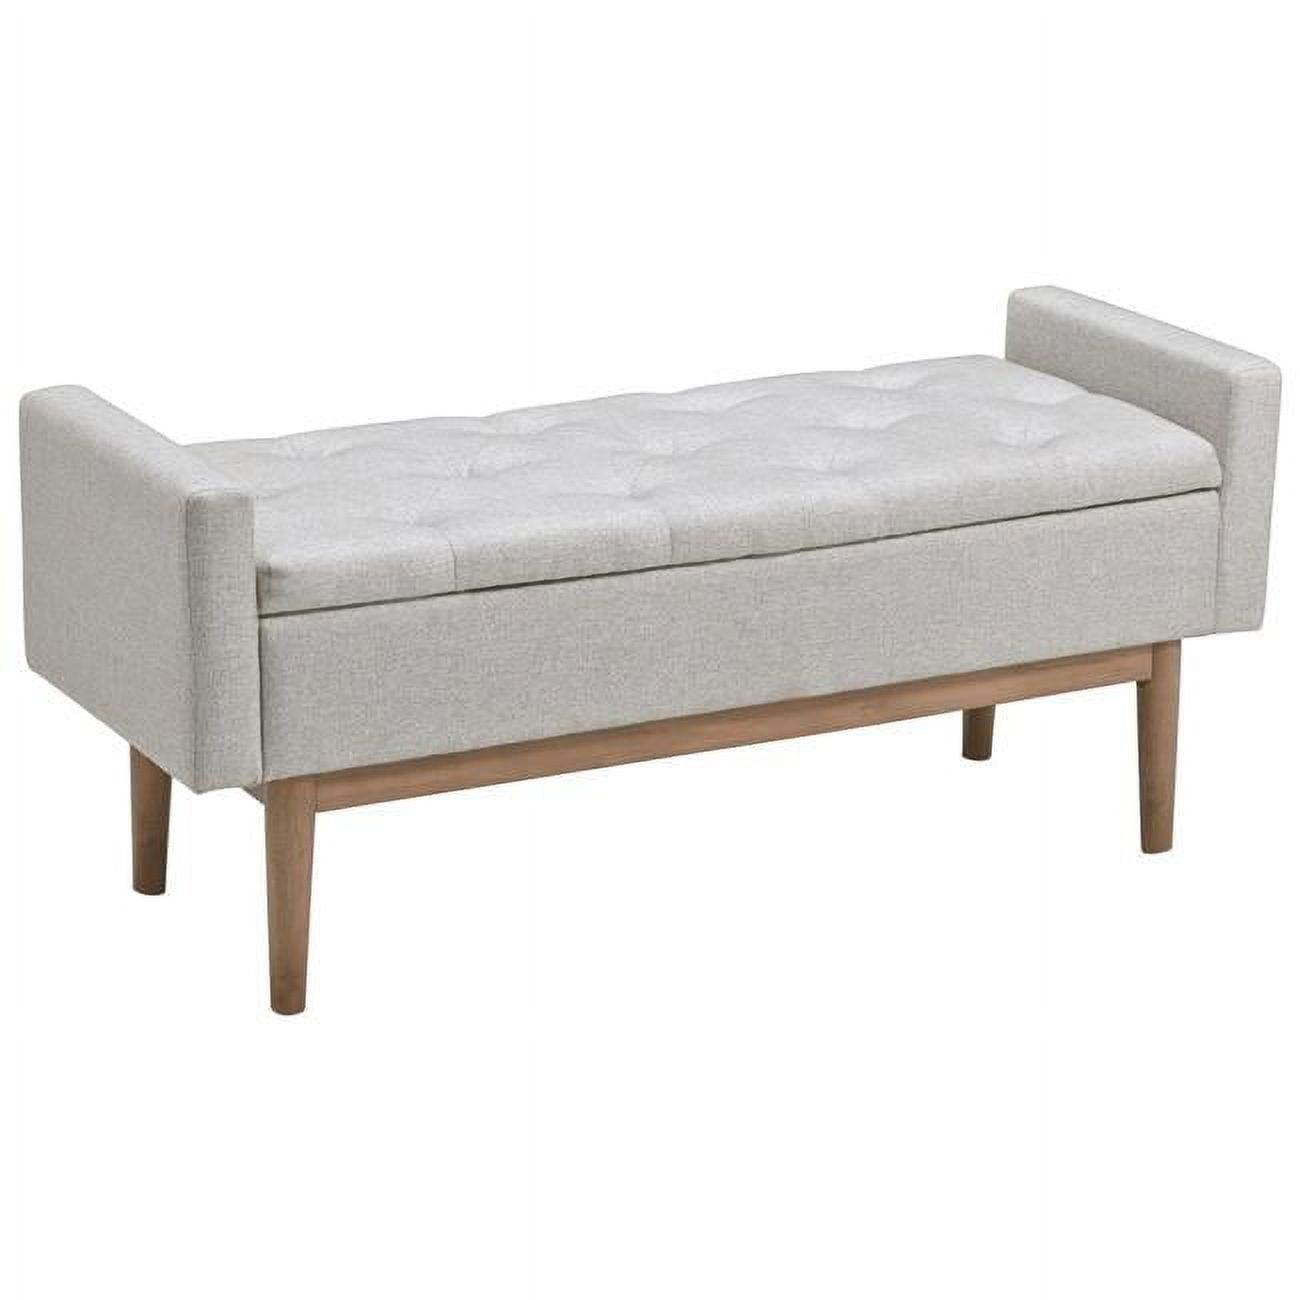 Elevated Light Gray Tufted Polyester Storage Bench with Arms